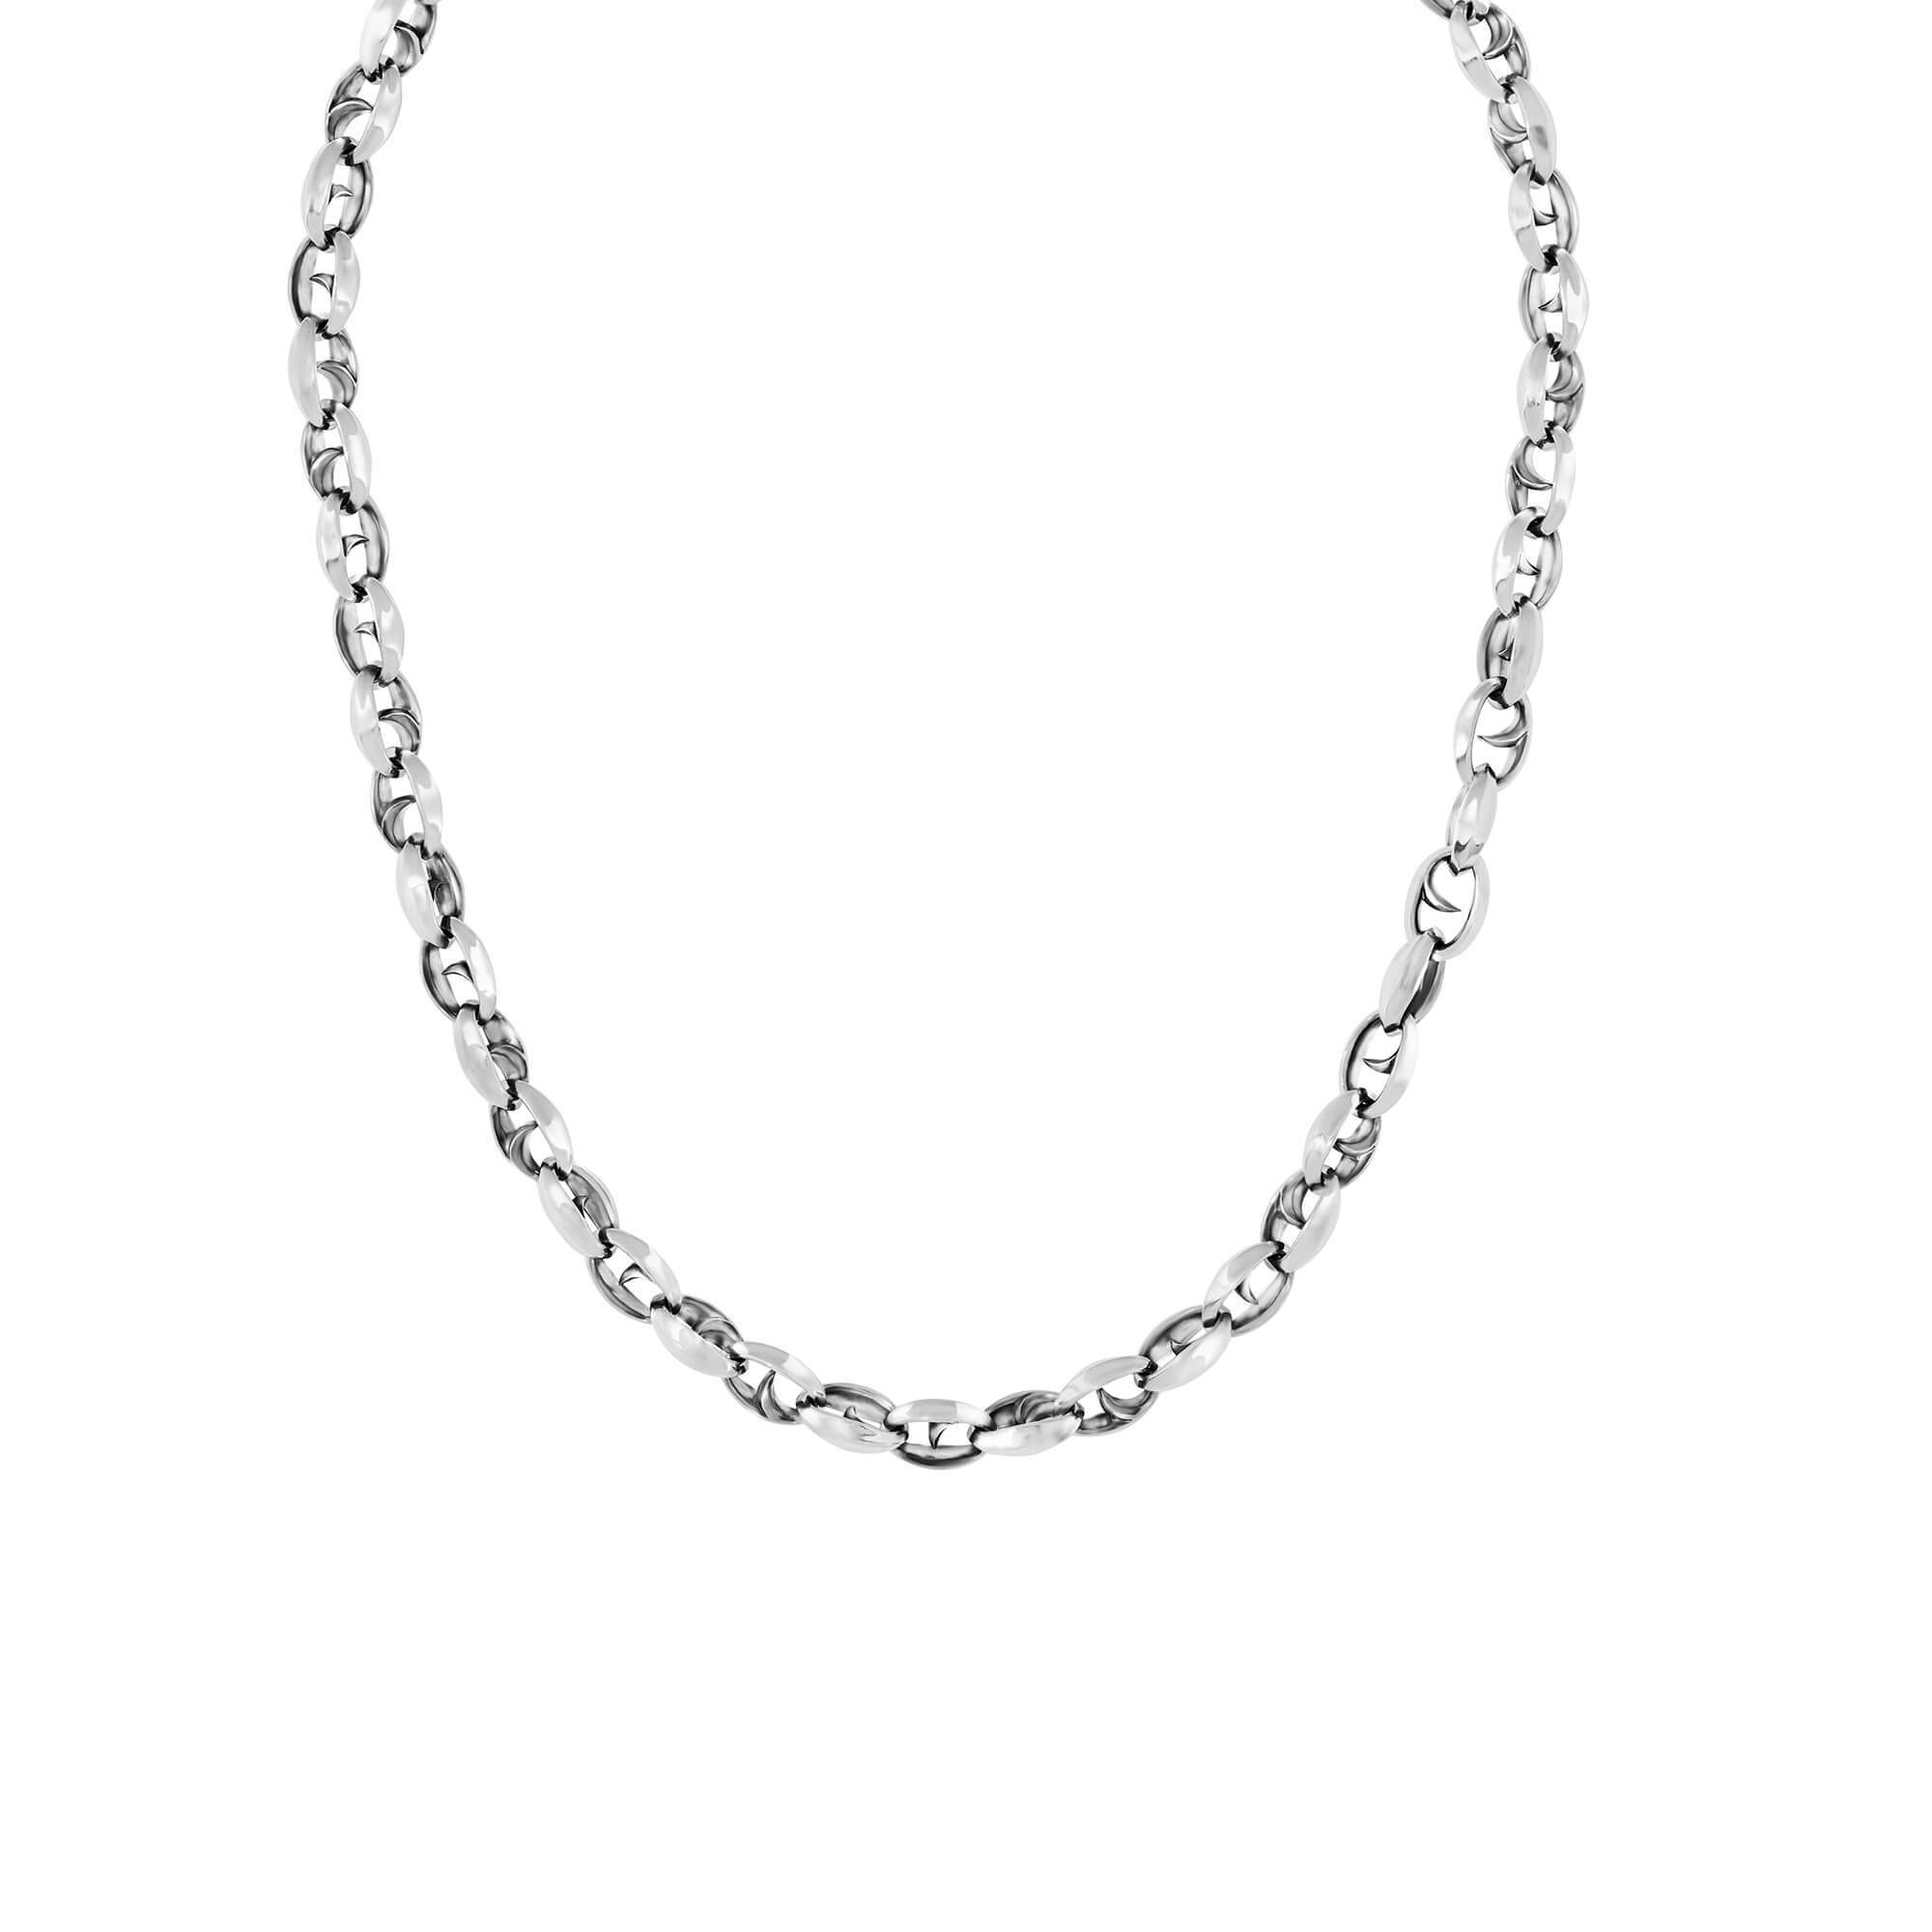 Thorn Addiction Classic Large Link Chain Necklace in Sterling Silver - 19"